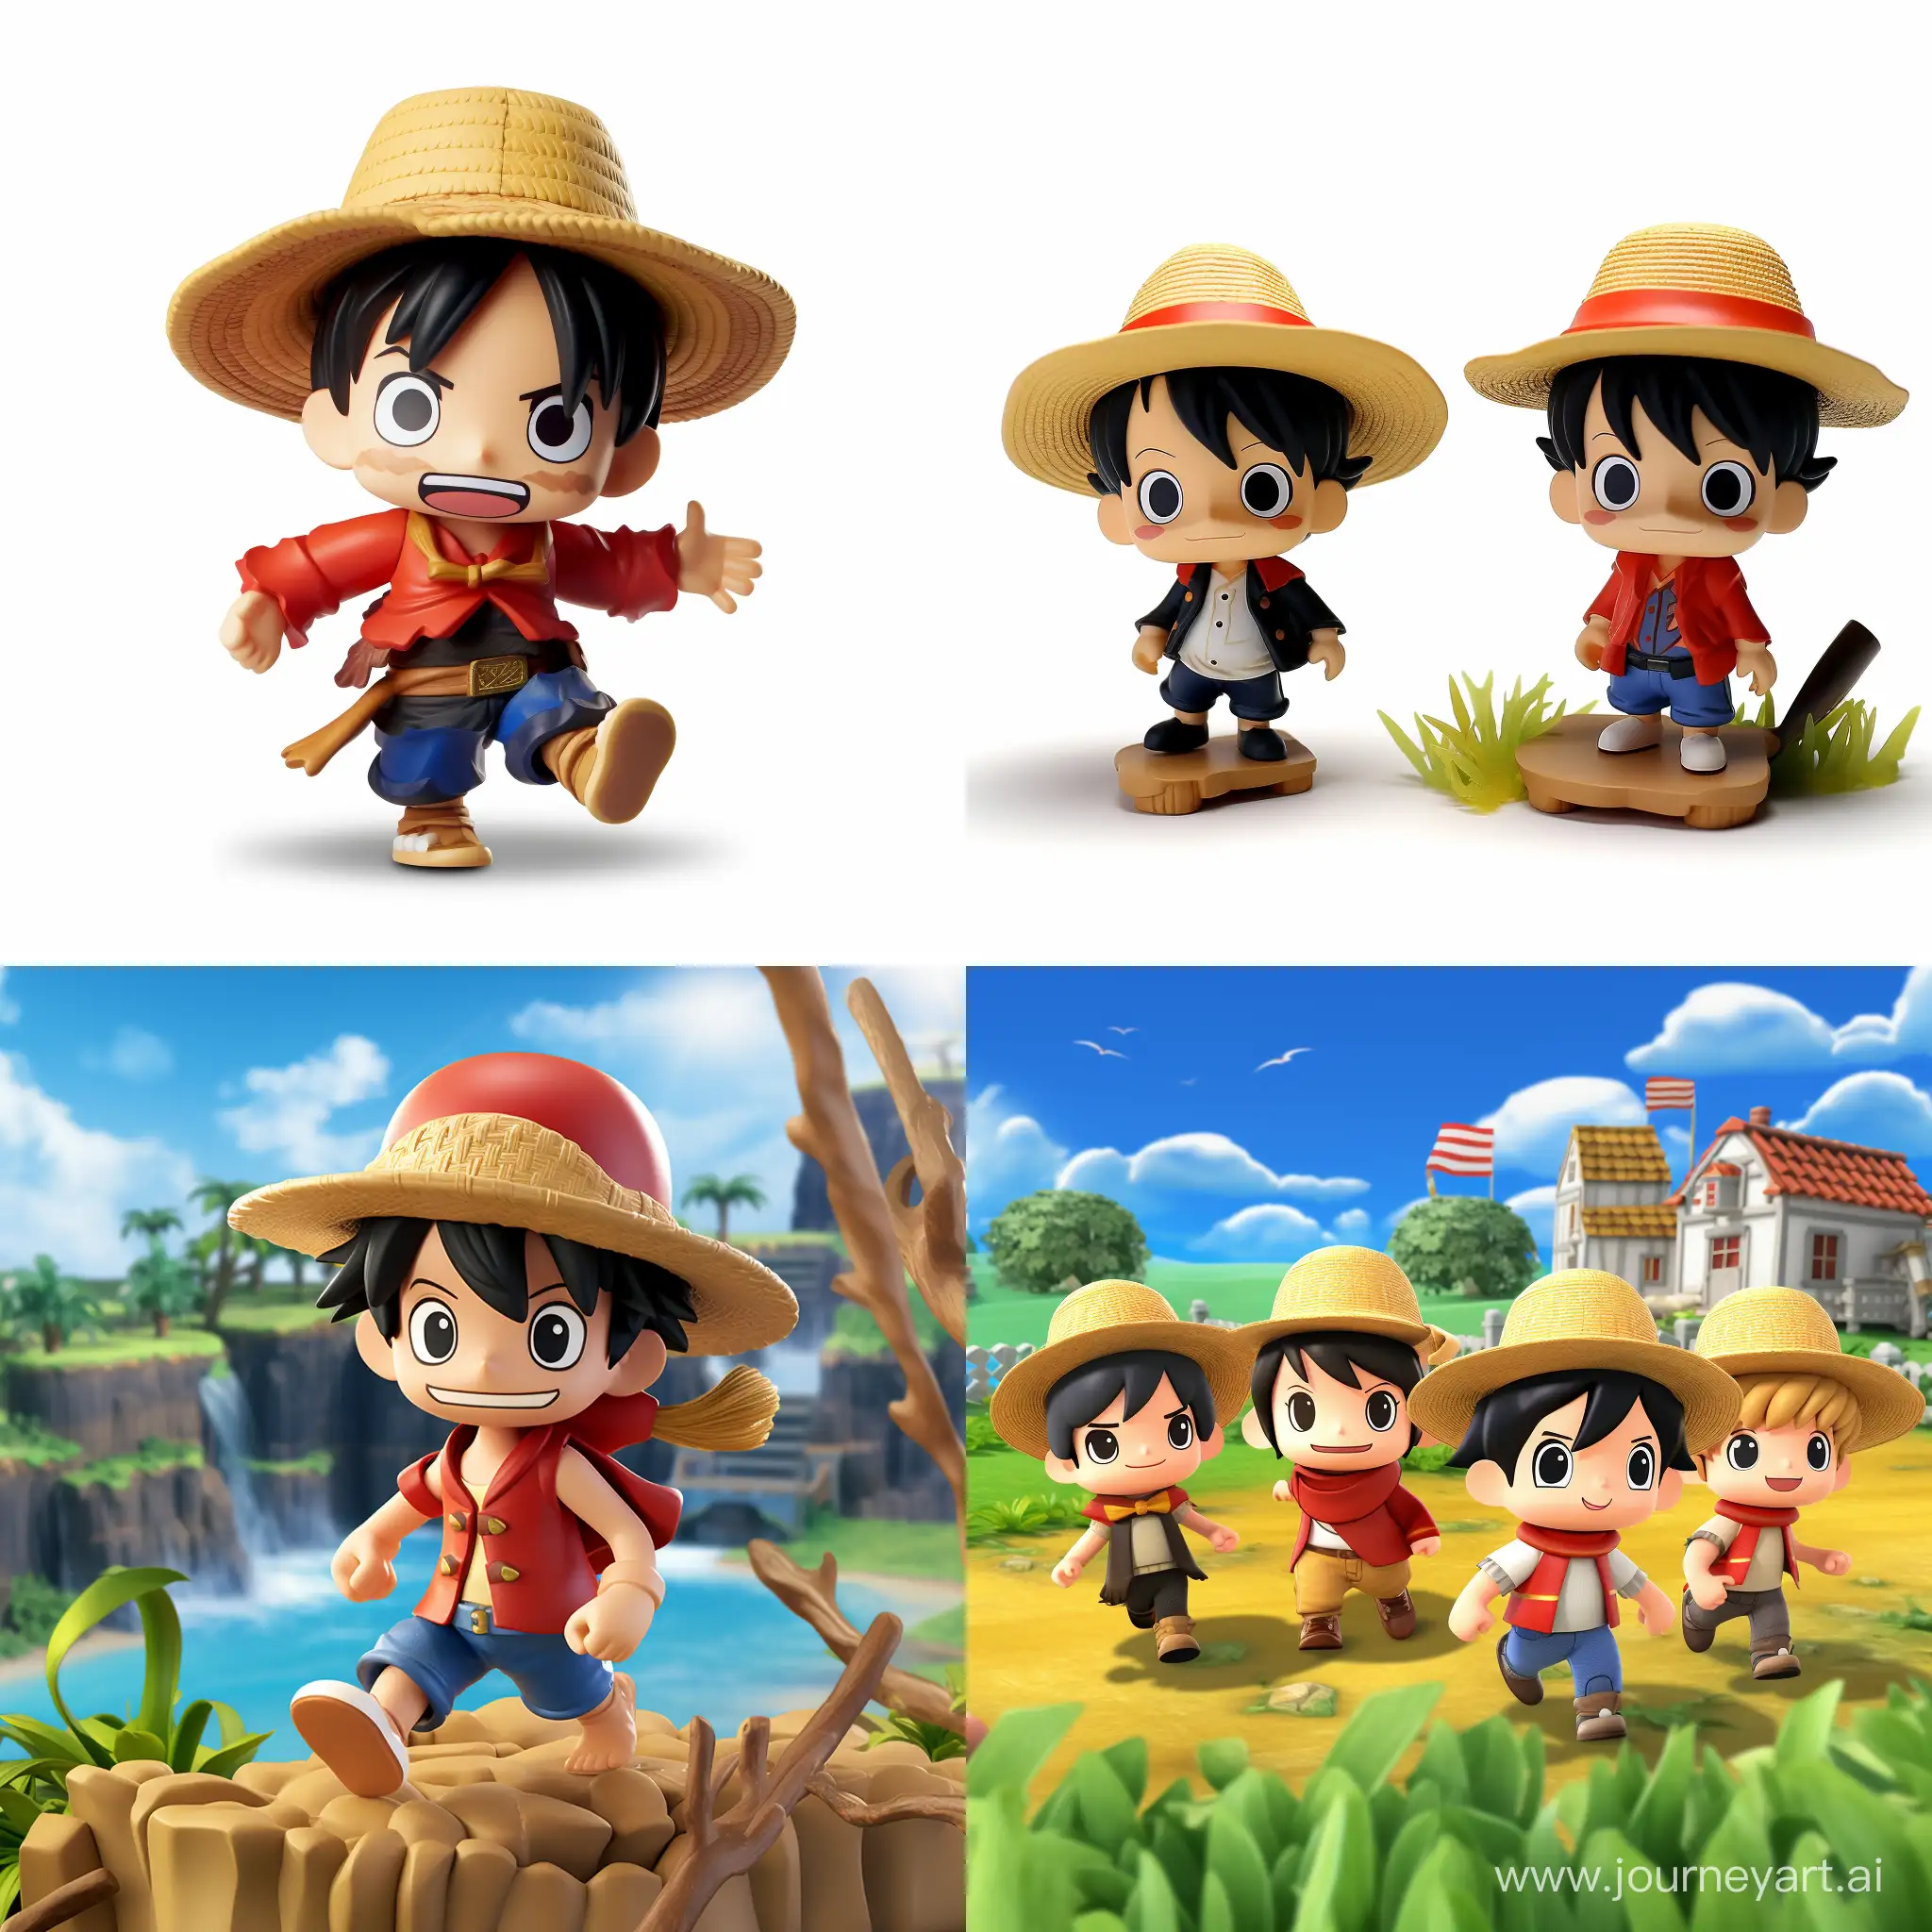 Customizable-Adorable-Luffy-Action-Figures-in-Playful-Playground-Scenes